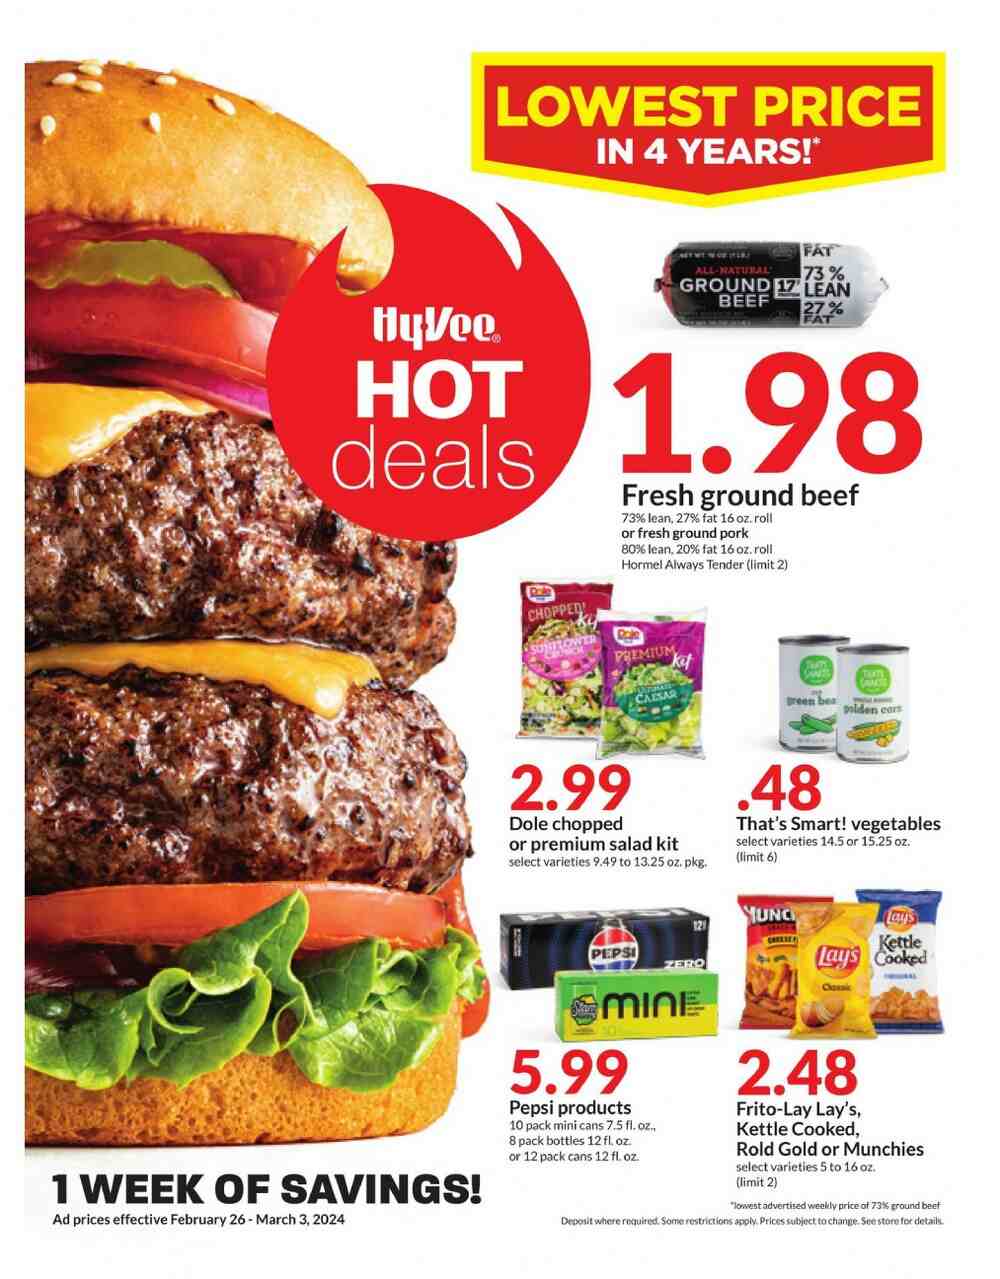 Hy-Vee Weekly Ad February 26 to March 3 2024 1 – hyvee ad 1 1